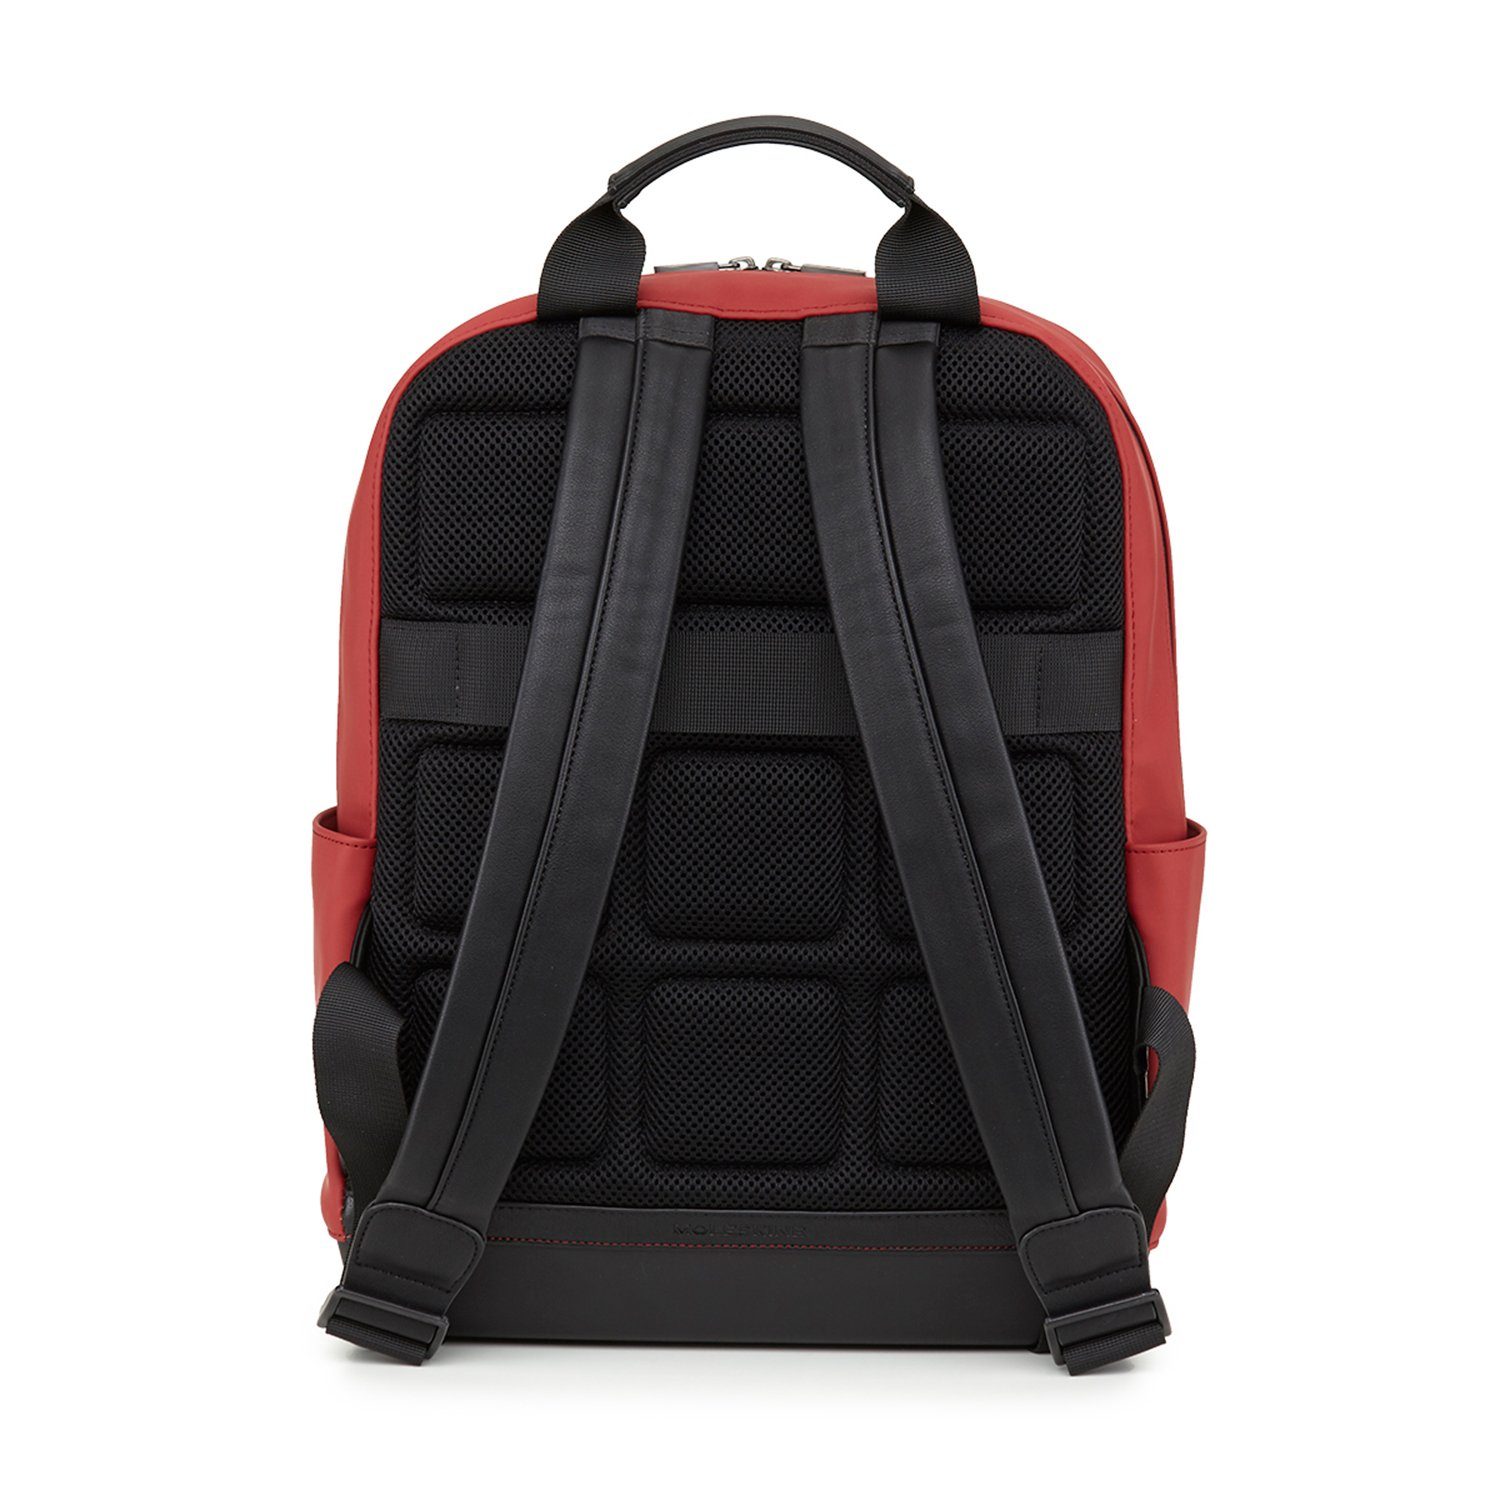 PU The Soft MOLESKINE Backpack Cityrucksack, Touch Bordeauxrot Bordeaux Red